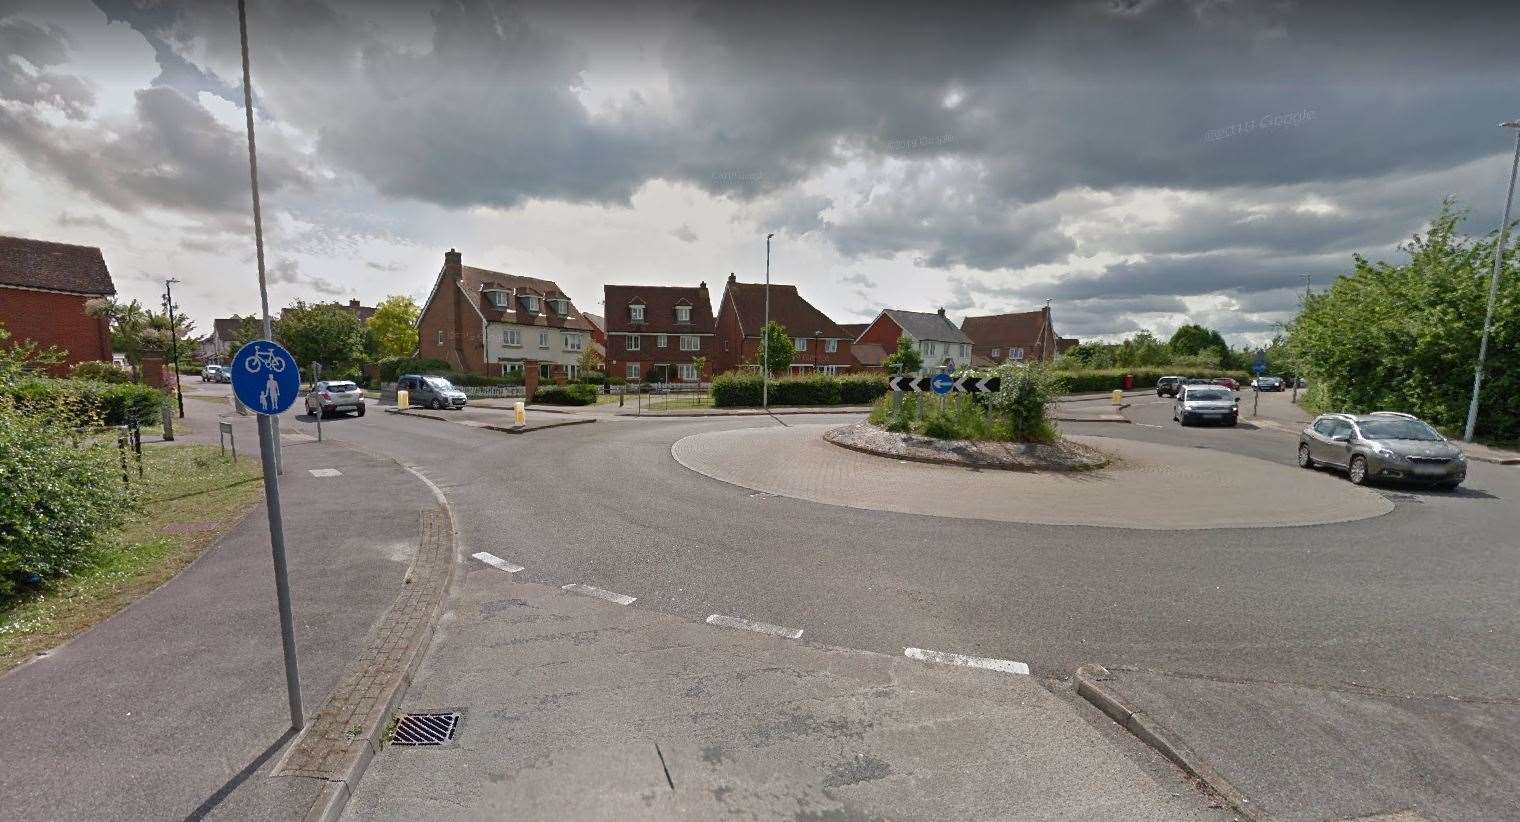 The dispersal order is in place in Eden Village, Sittingbourne. Picture: Google